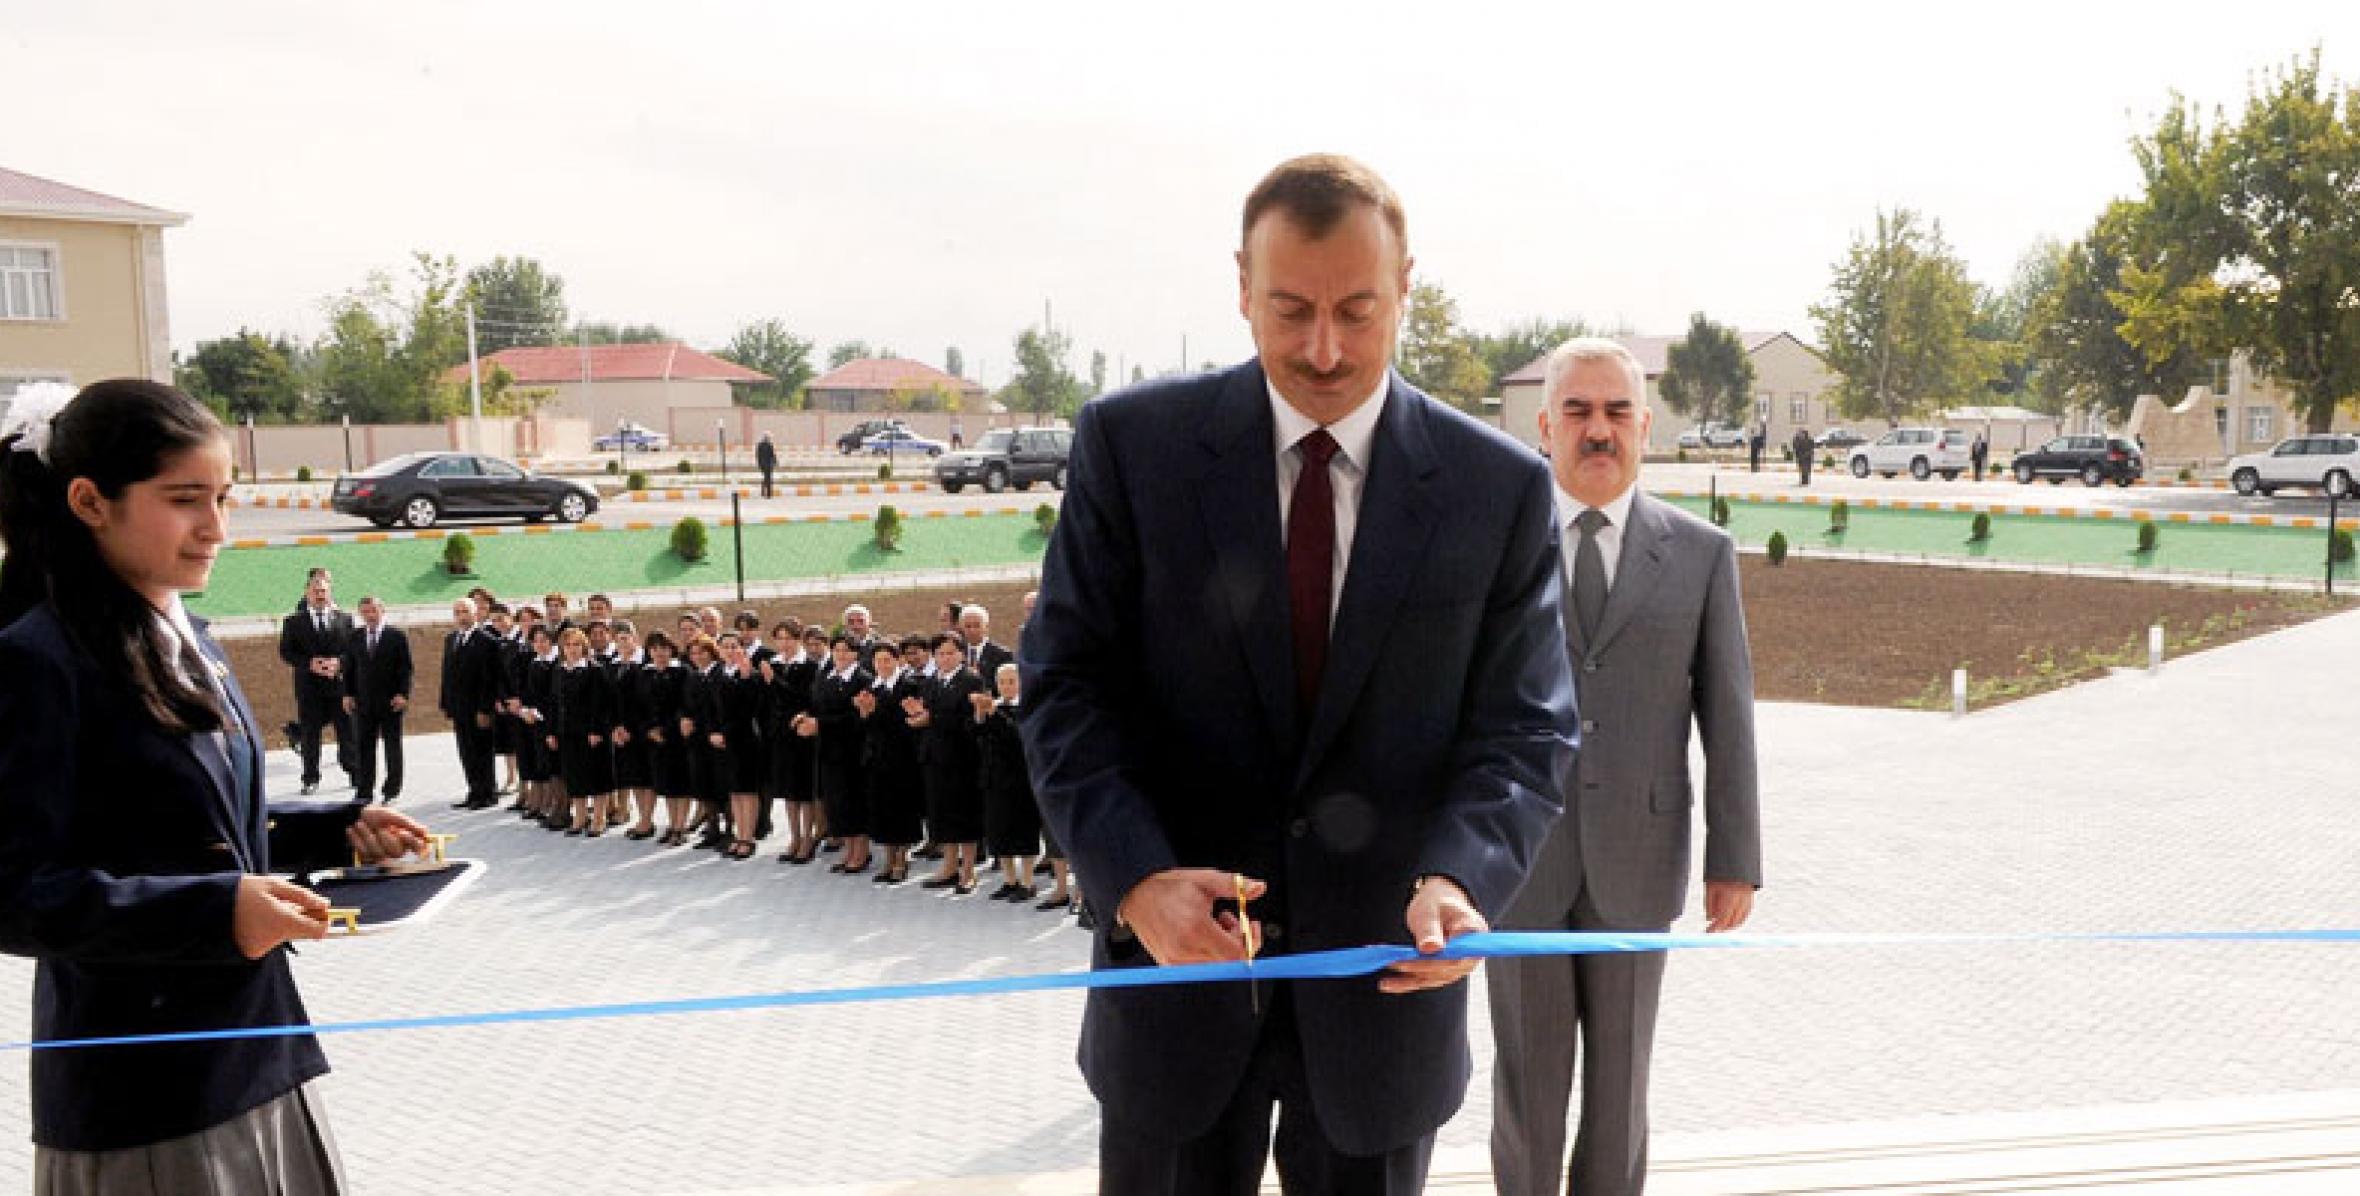 Ilham Aliyev attended the opening of a new school building in the Yengija village of Sharur district